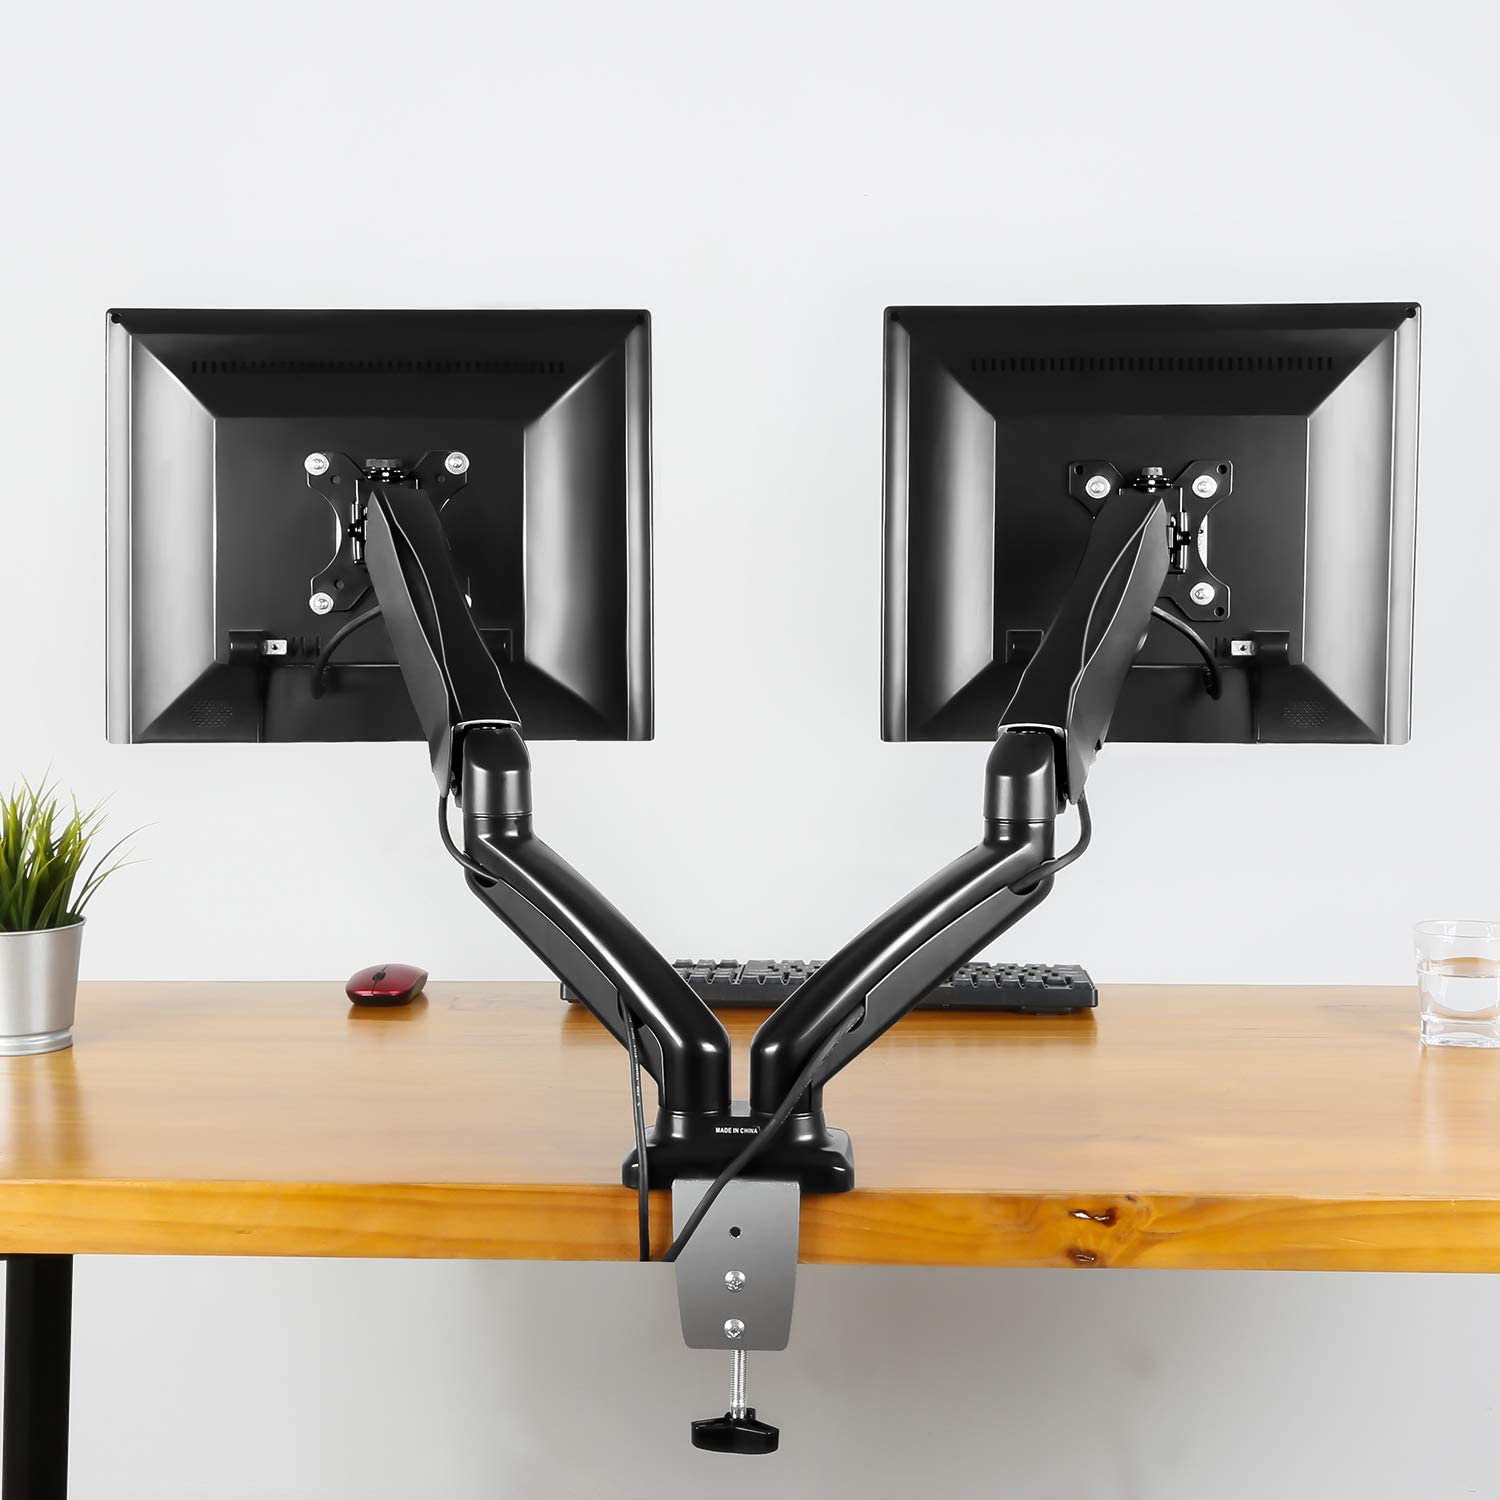 Dual Arms monitor mount for home office